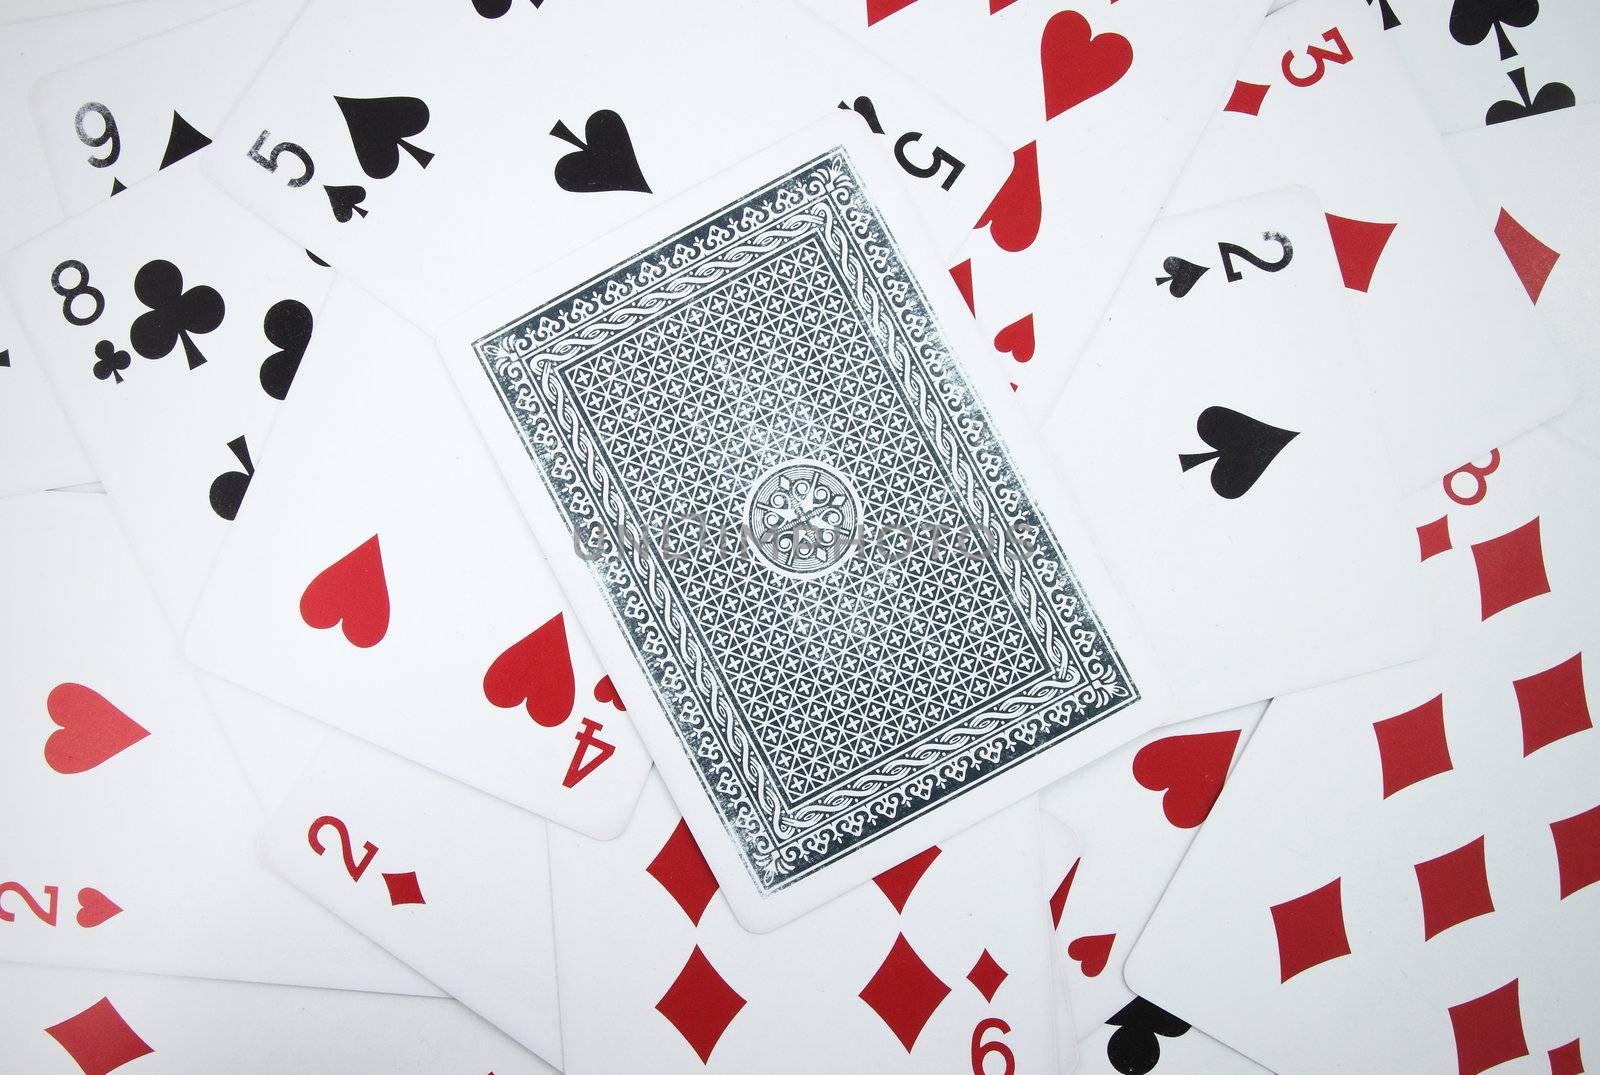 Card with playing cards background